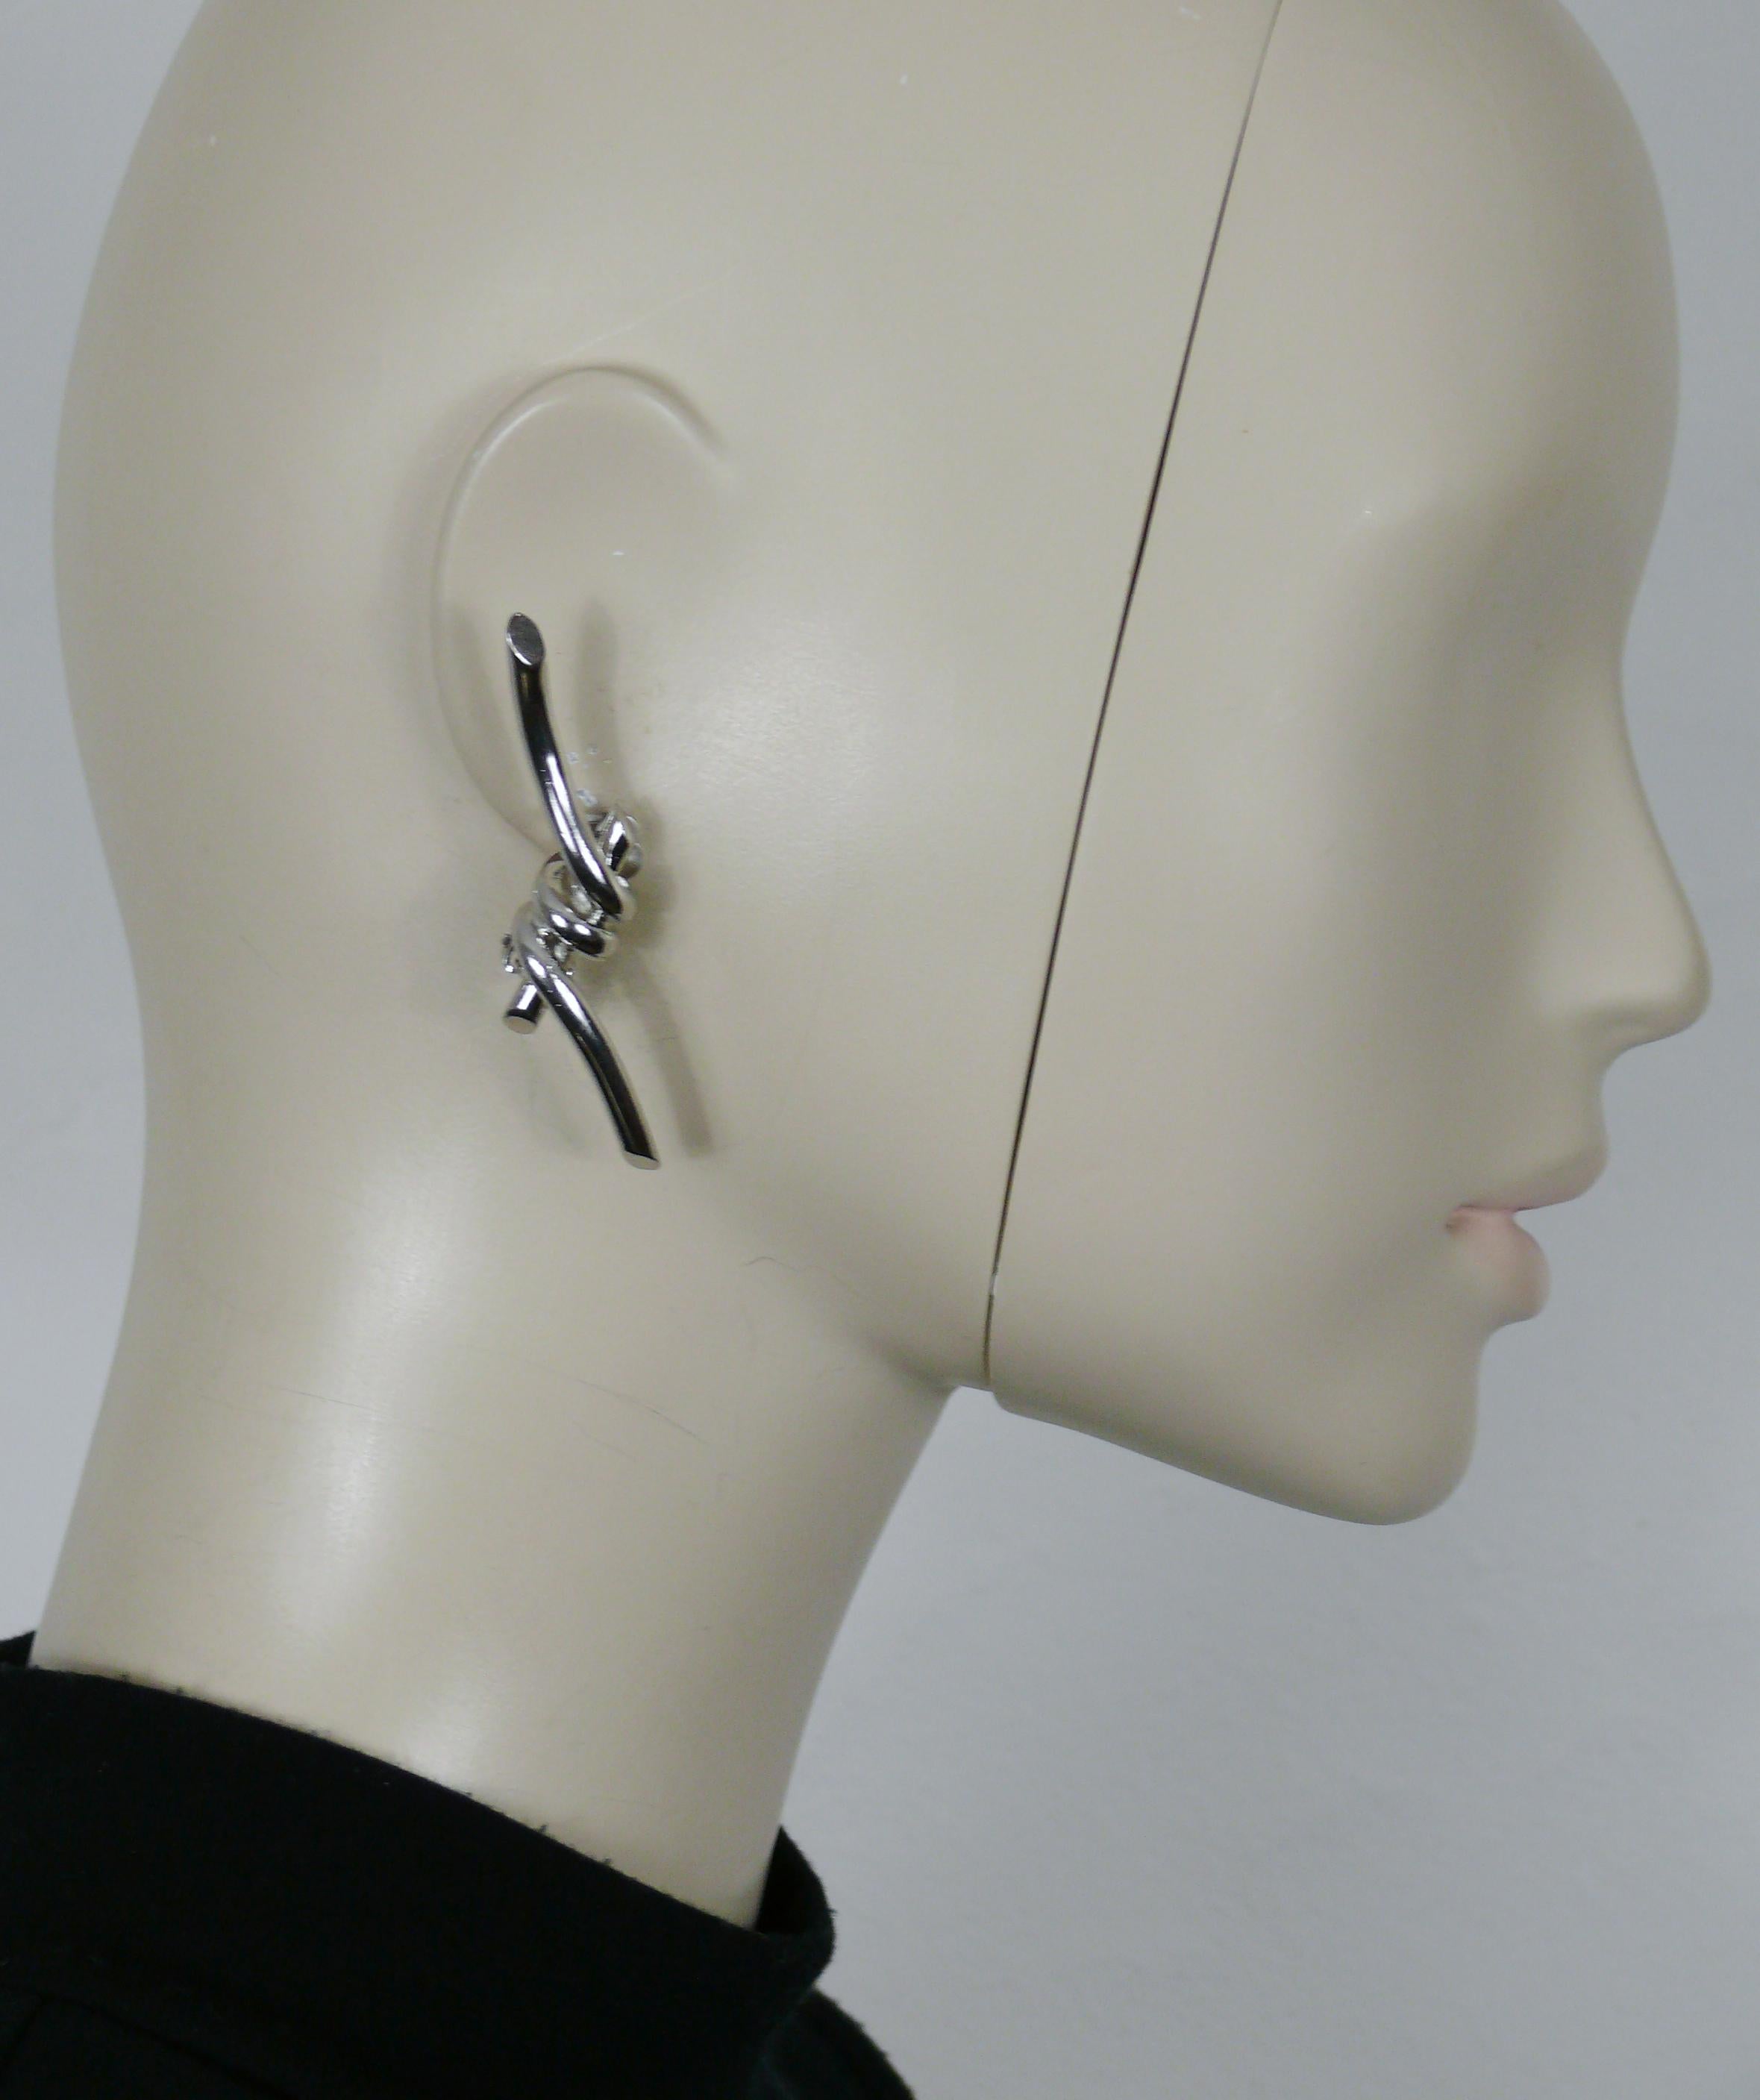 THIERRY MUGLER vintage silver tone barbed wire clip-on earrings.

Embossed TM.

Indicative measurements : height approx. 6.2 cm (2.44 inches) / max. width approx. 1.2 cm (0.47 inch).

Weight per earring : approx. 11 grams.

Material : Silver tone